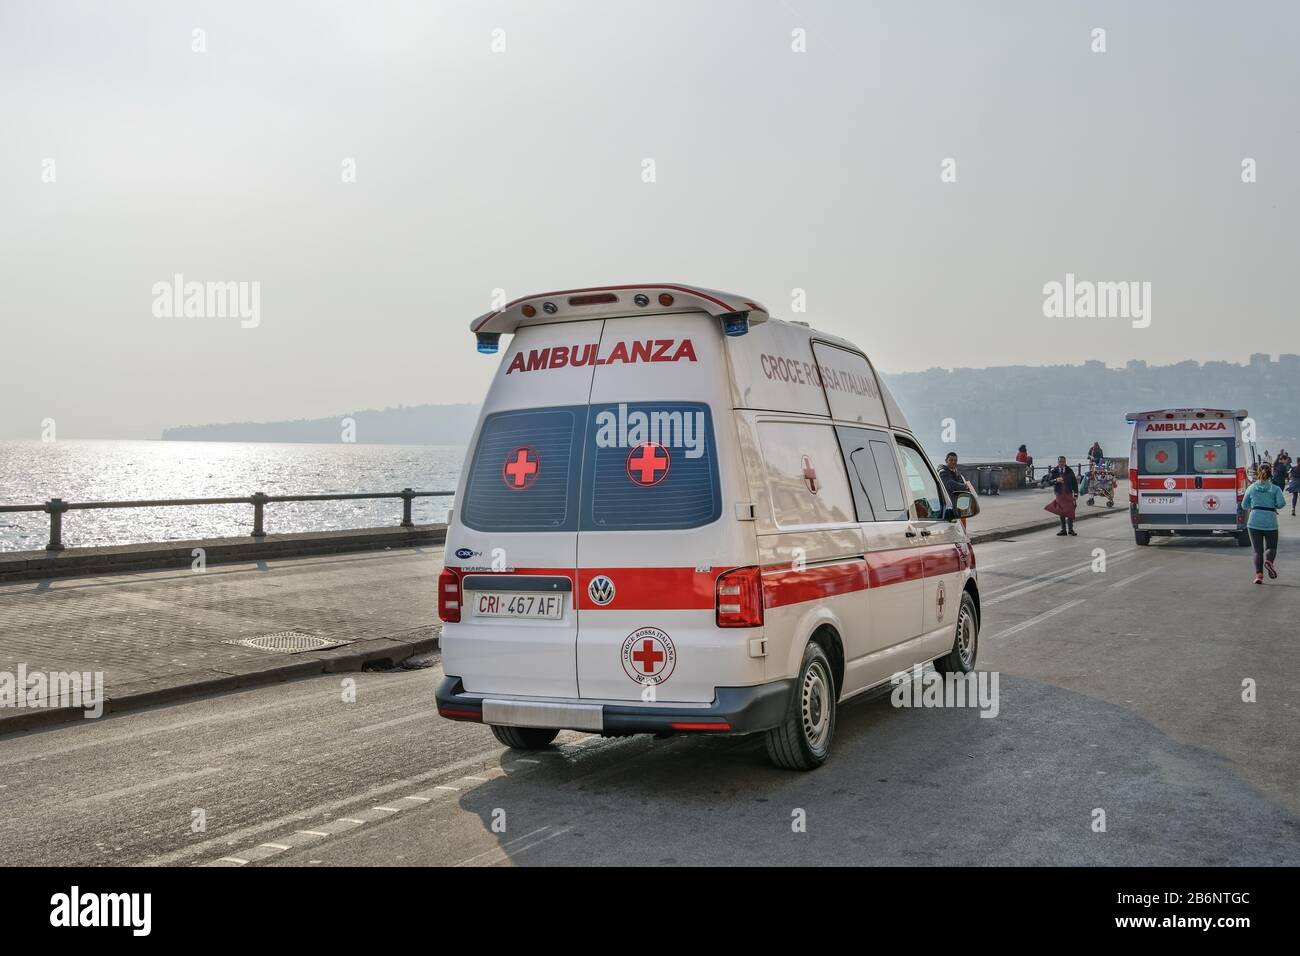 Italian Red Cross Ambulance speeding on street during medical emergency. Croce Rossa Italiana cars running through the streets of Naples waterfront. Stock Photo